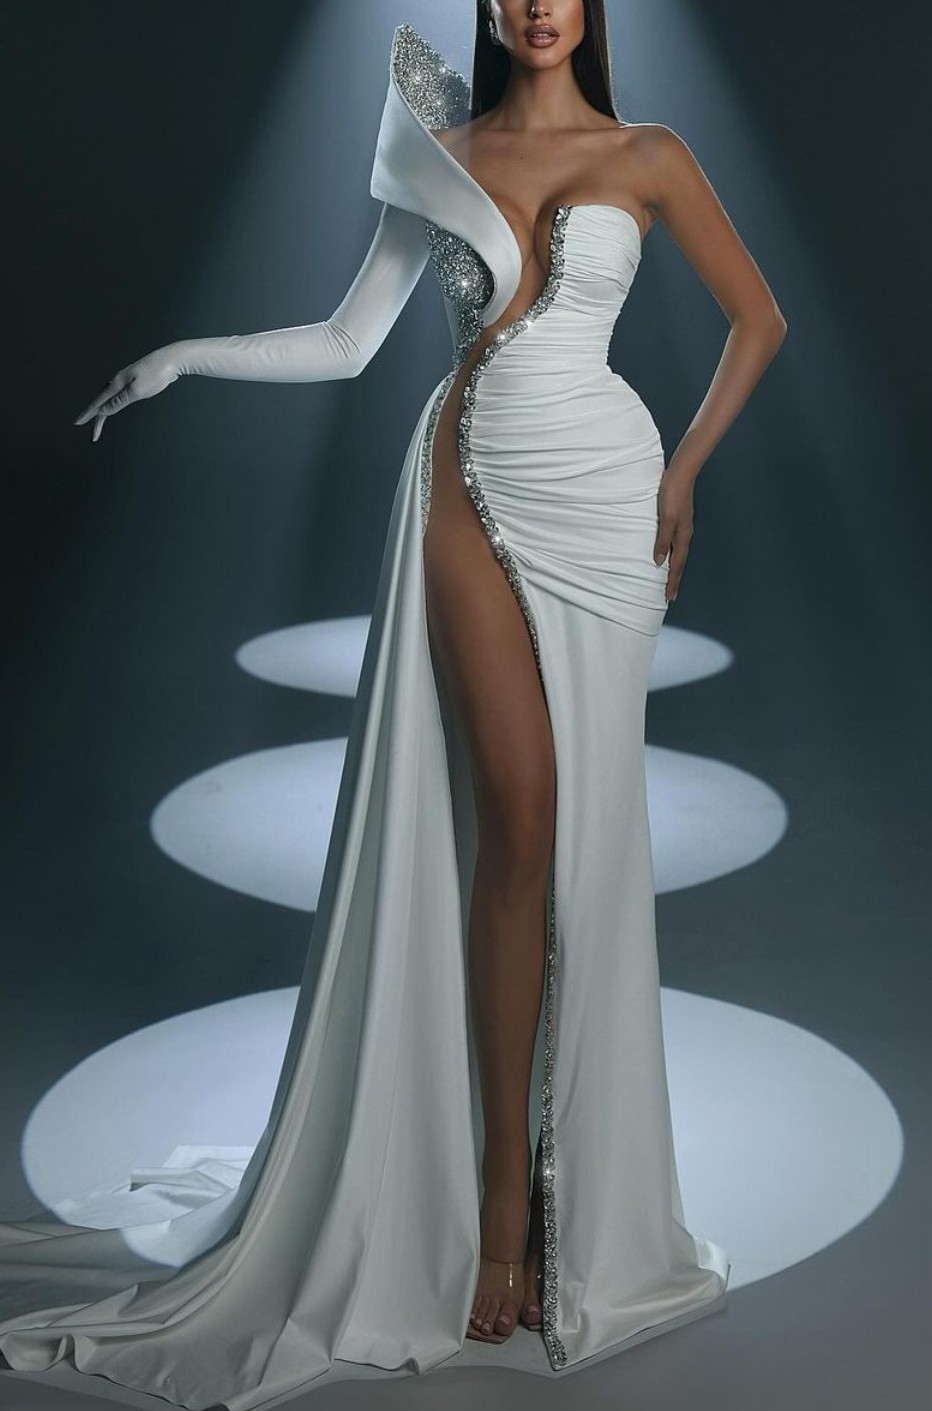 White Prom Dress With Gloves Long Mermaid One Shoulder With High Slit YL0304